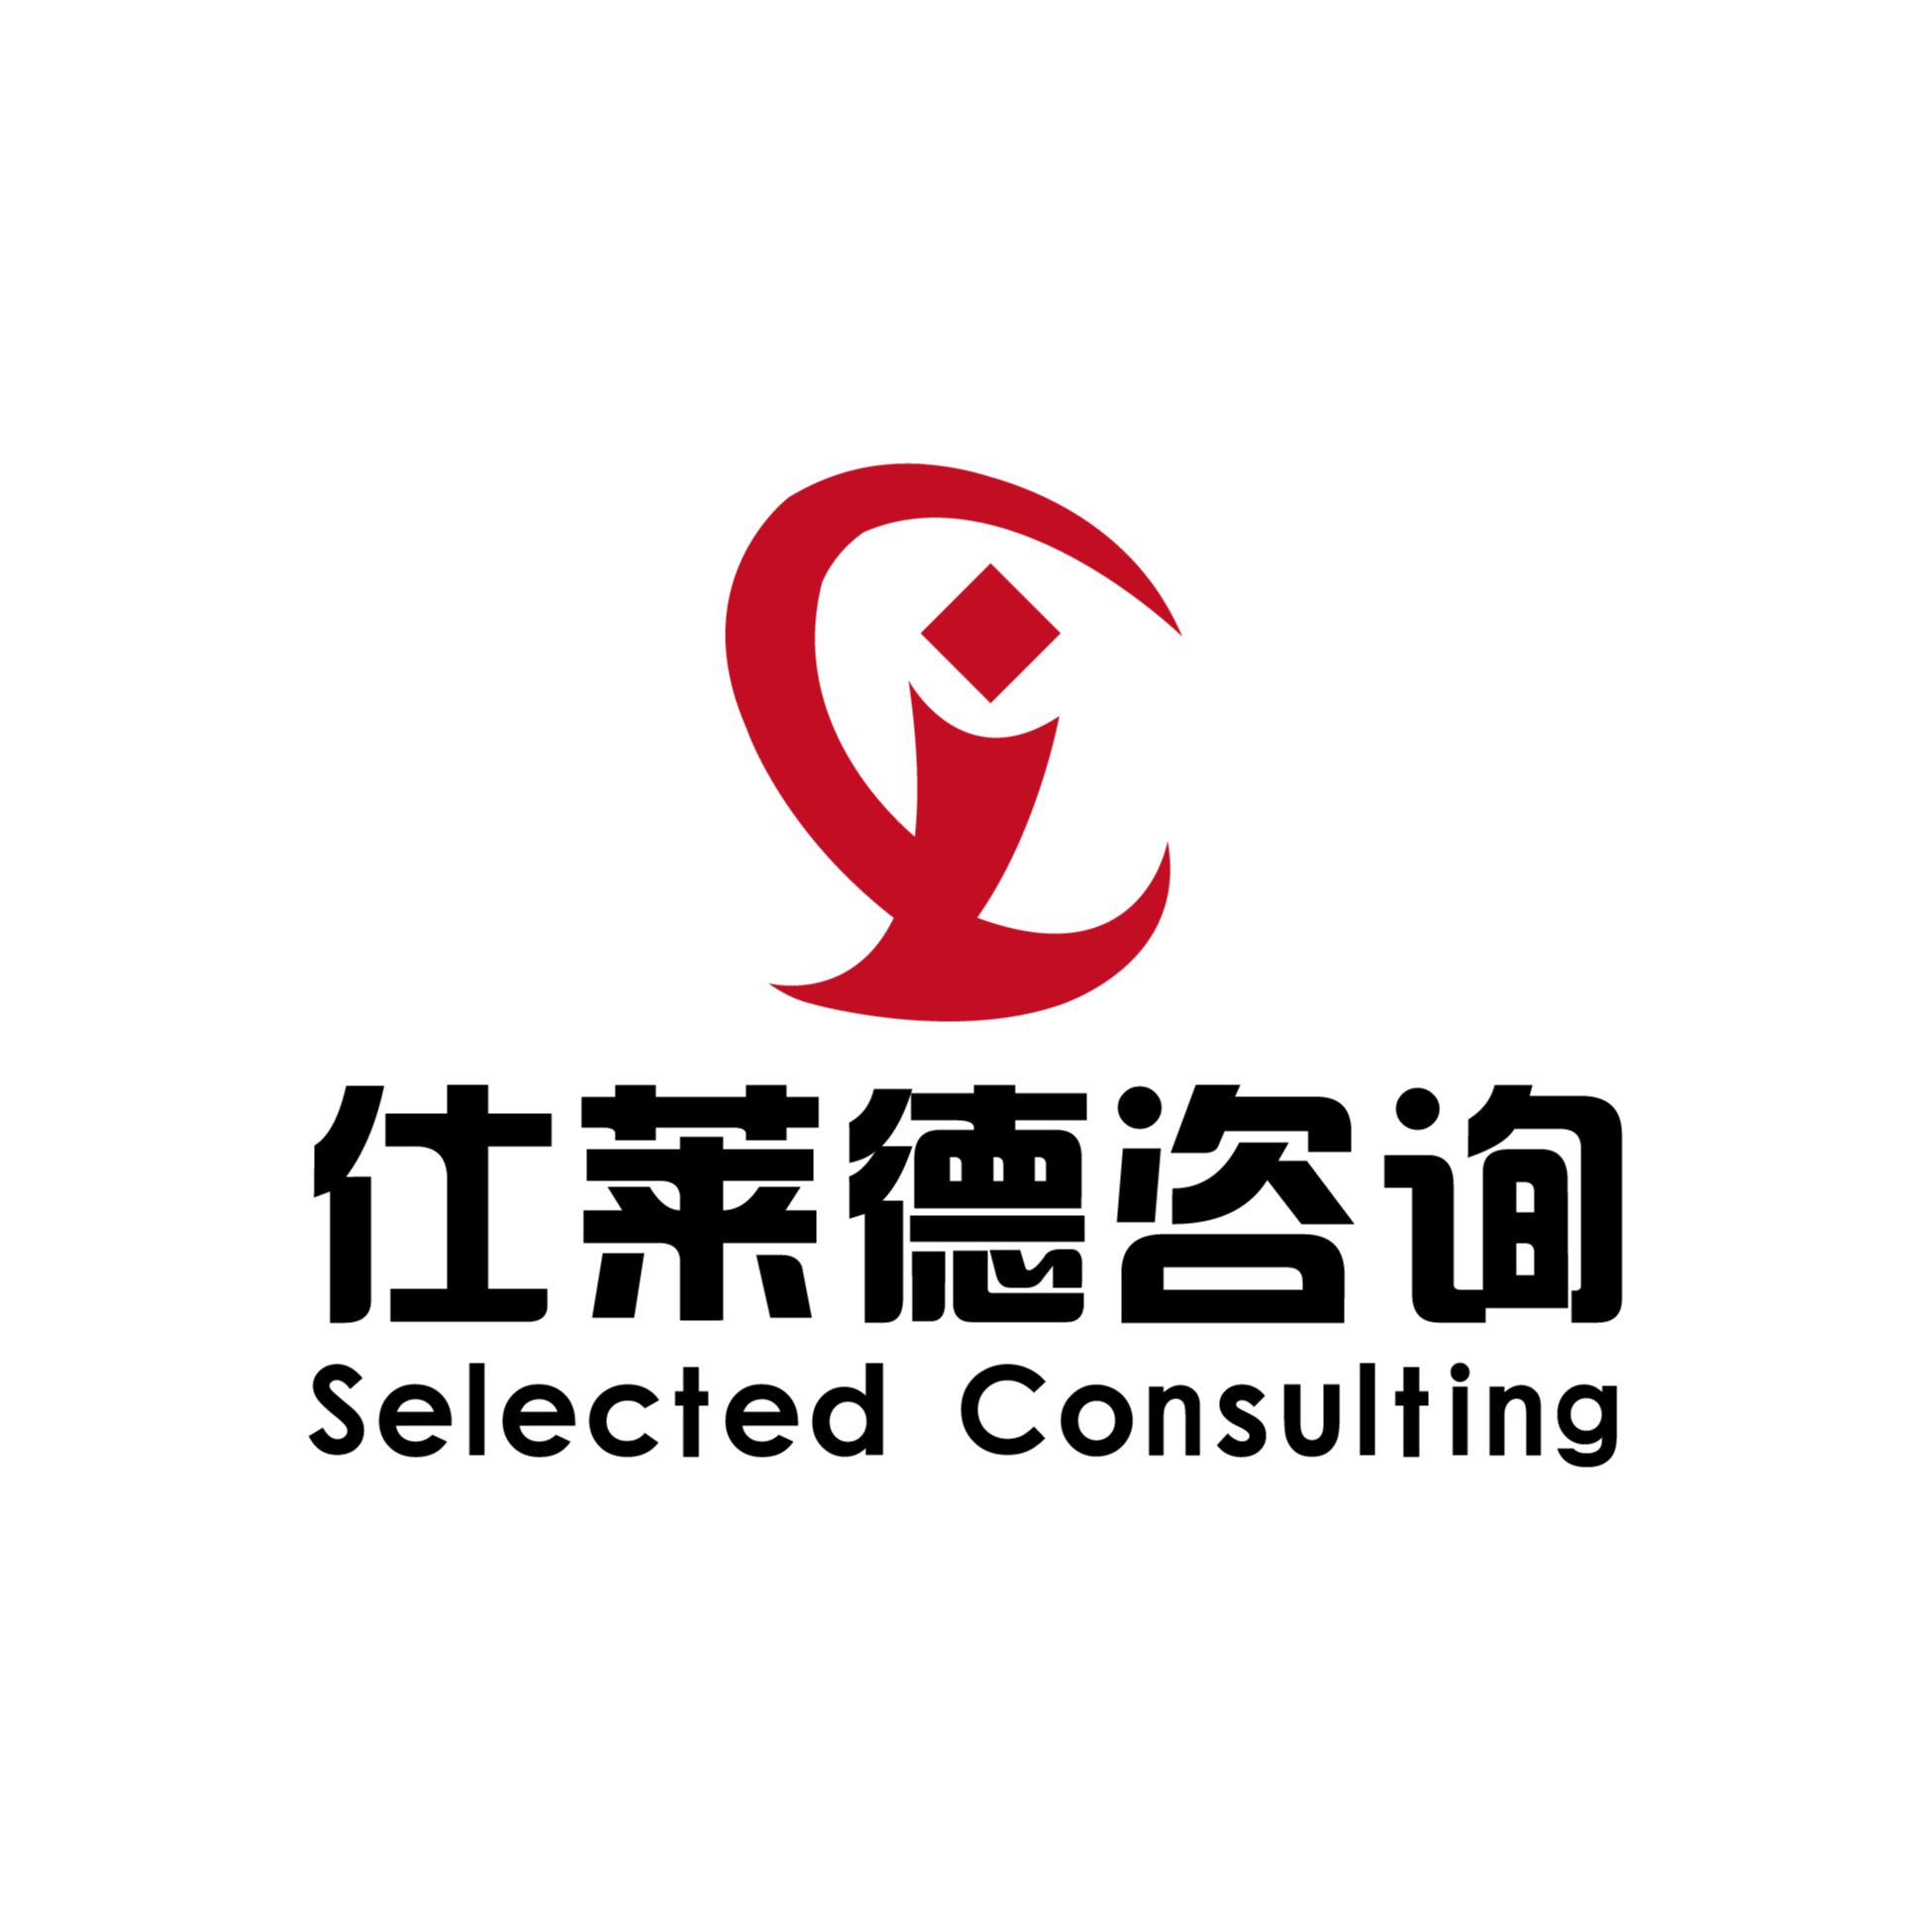 Selected Consultant Logo